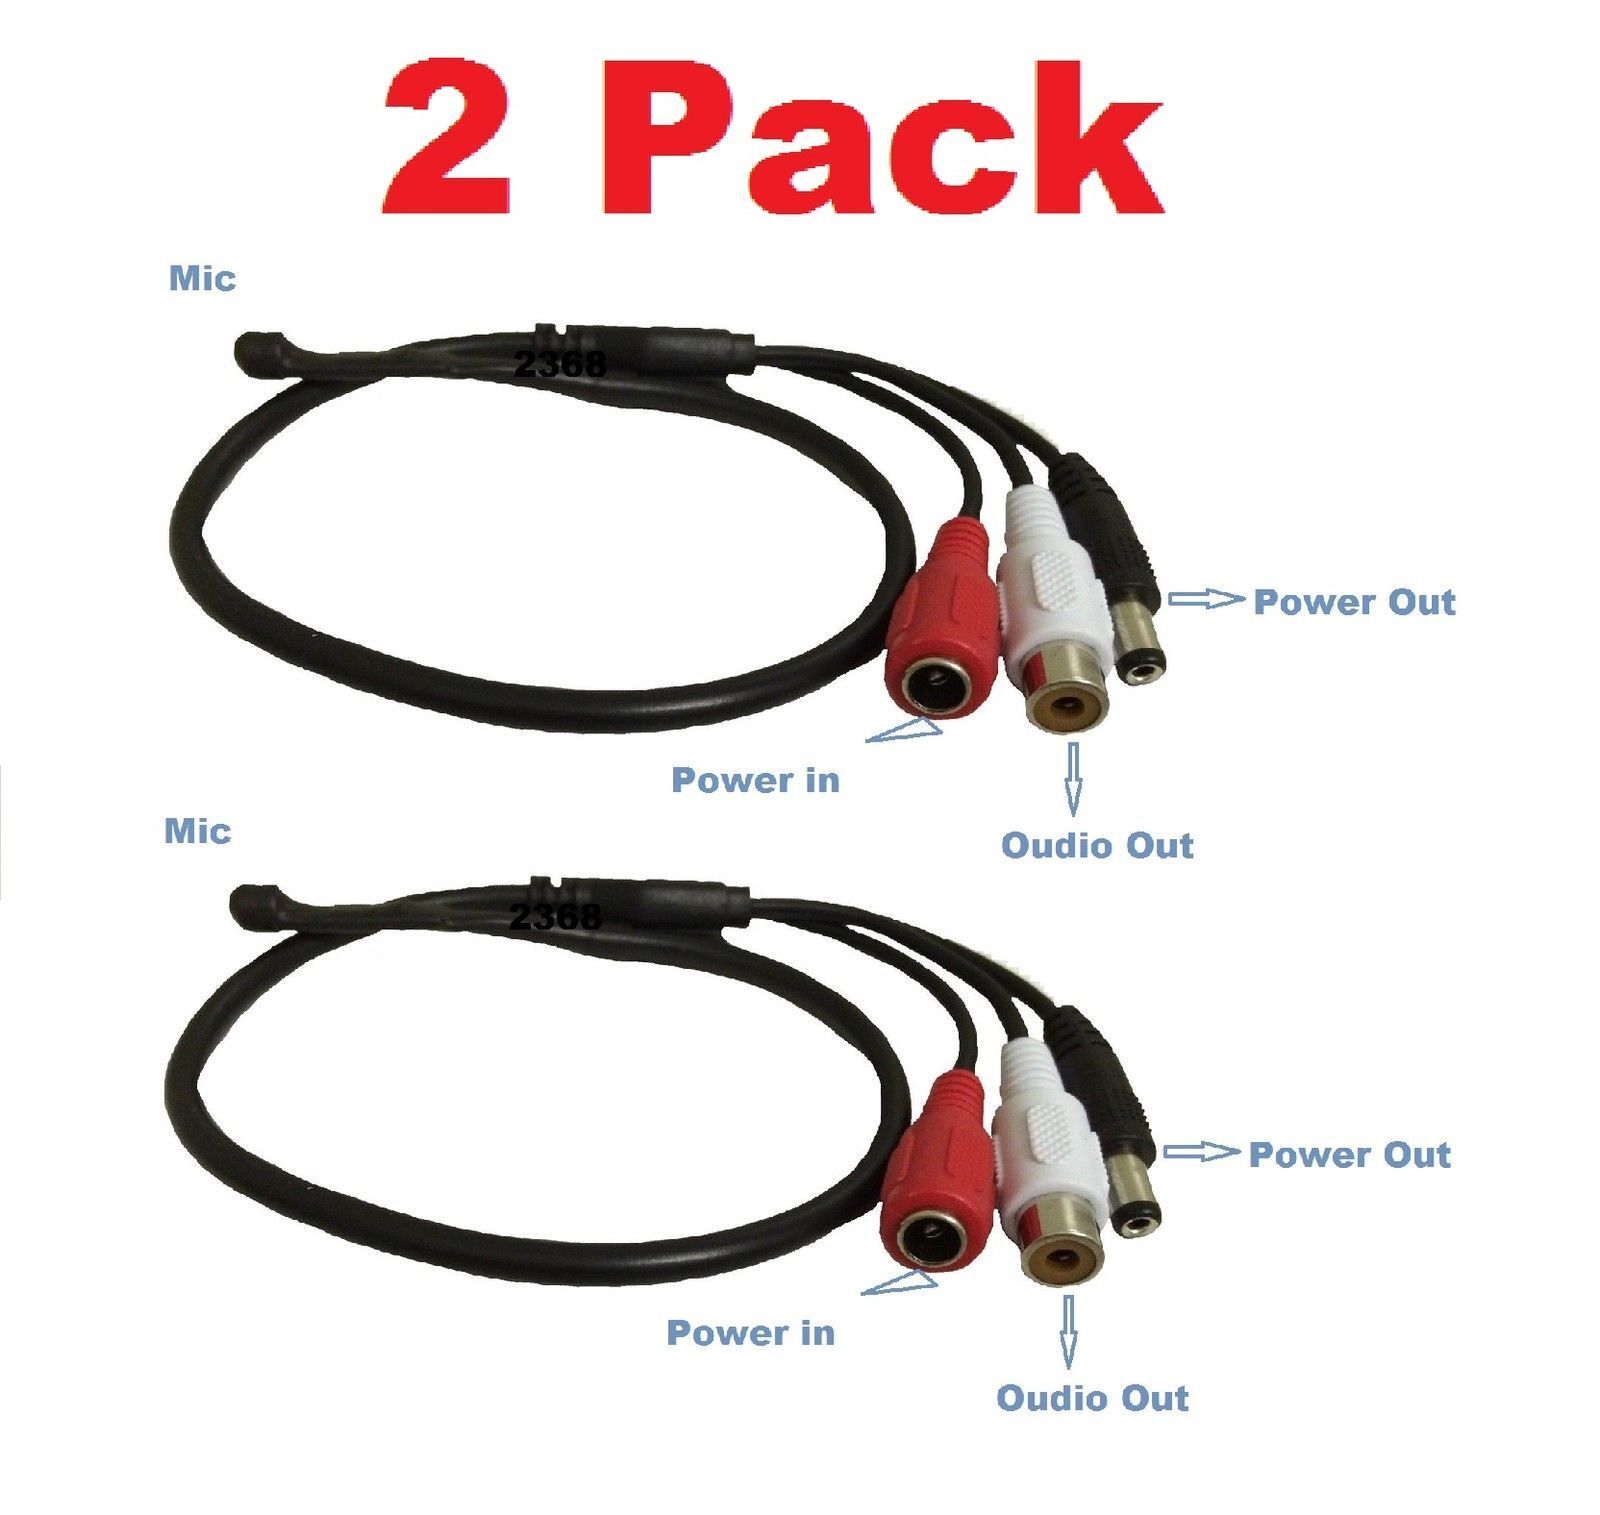 2 Pack High Sensitive Audio Mic Microphone for CCTV Security Camera 